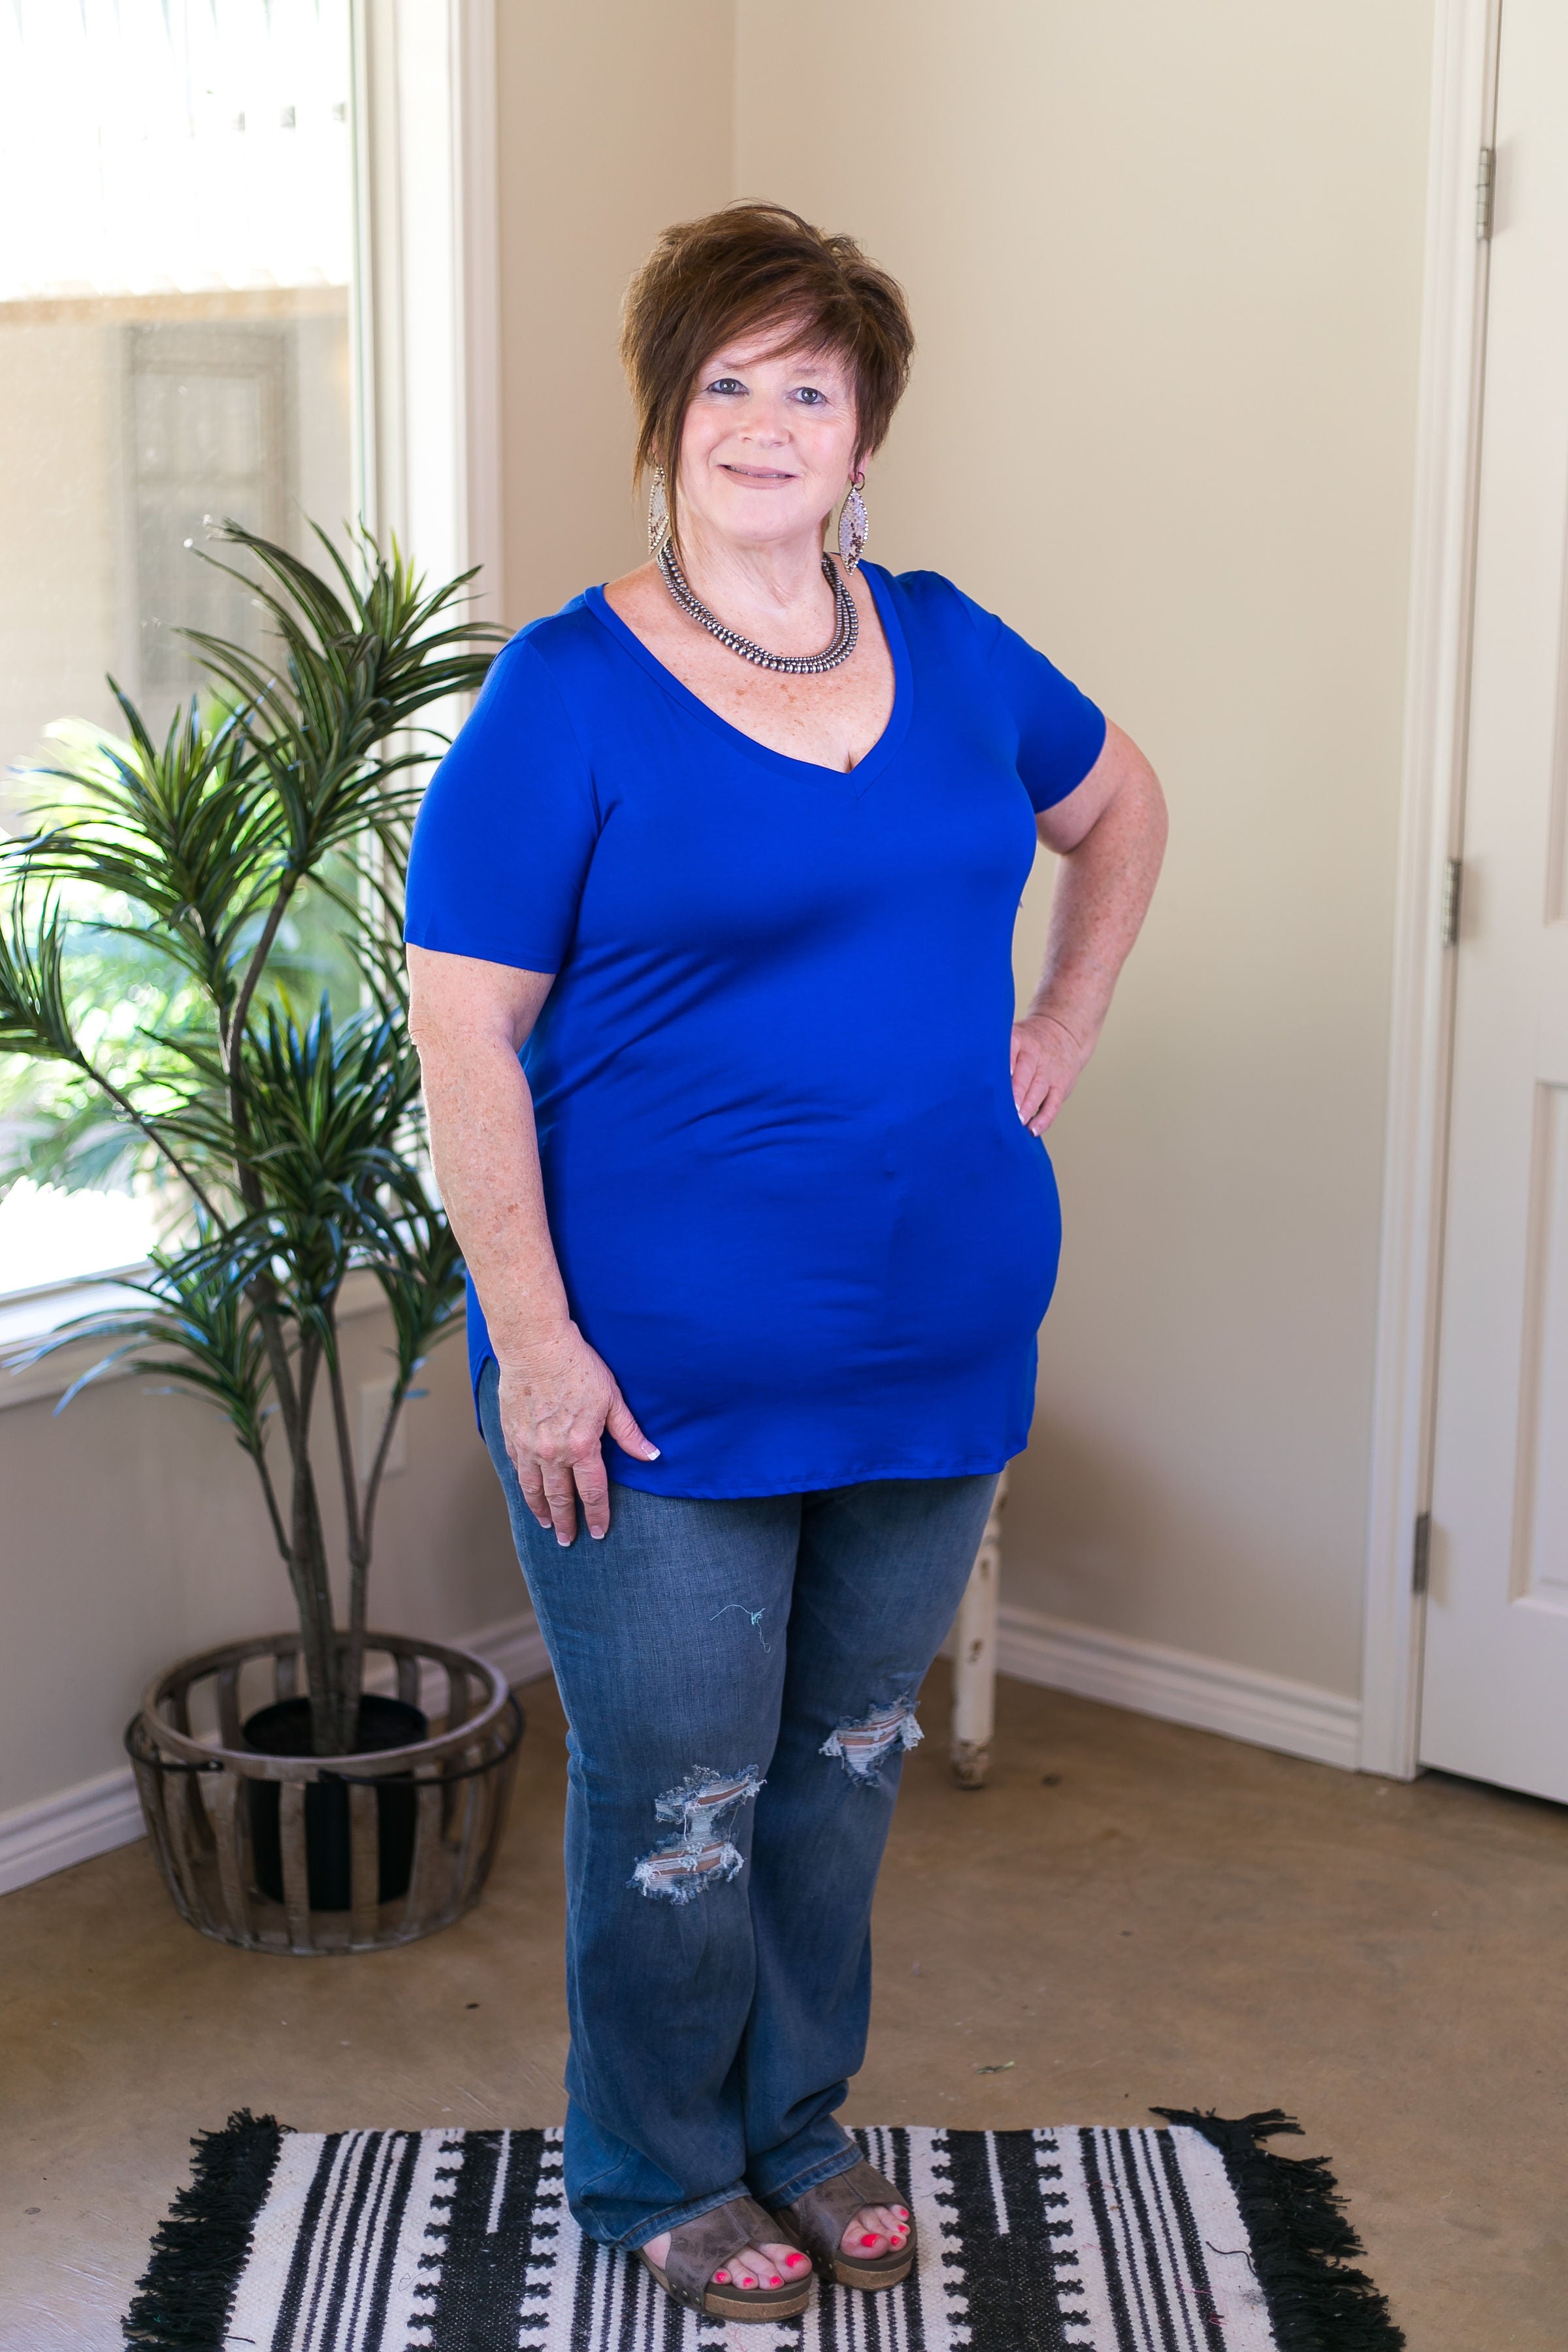 Last Chance Size 3XL | Simply The Best V Neck Short Sleeve Tee Shirt in Royal Blue - Giddy Up Glamour Boutique